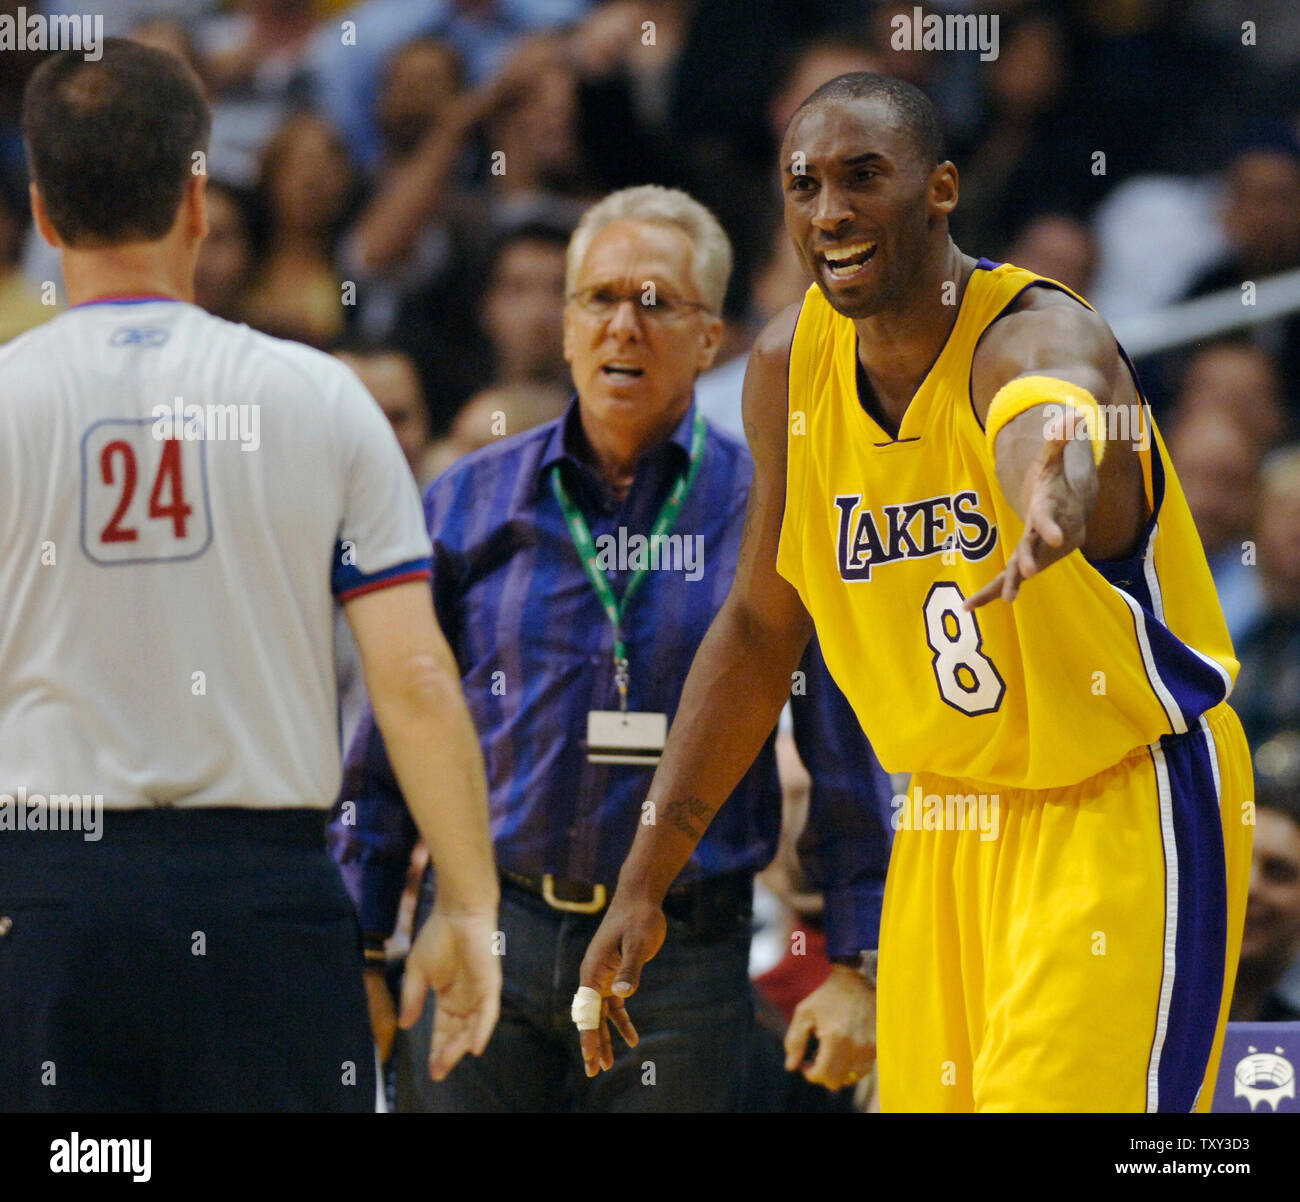 Los Angeles Lakers guard Kobe Bryant argues a call  in the waning minute of fourth quarter action of the Lakers/Clippers NBA game in Los Angeles, California on November 18, 2005. The Clippers defeated the Lakers 97-91. Looking on is Westwood One founder Norm Pattiz (C).   (UPI Photo/Jim Ruymen) Stock Photo